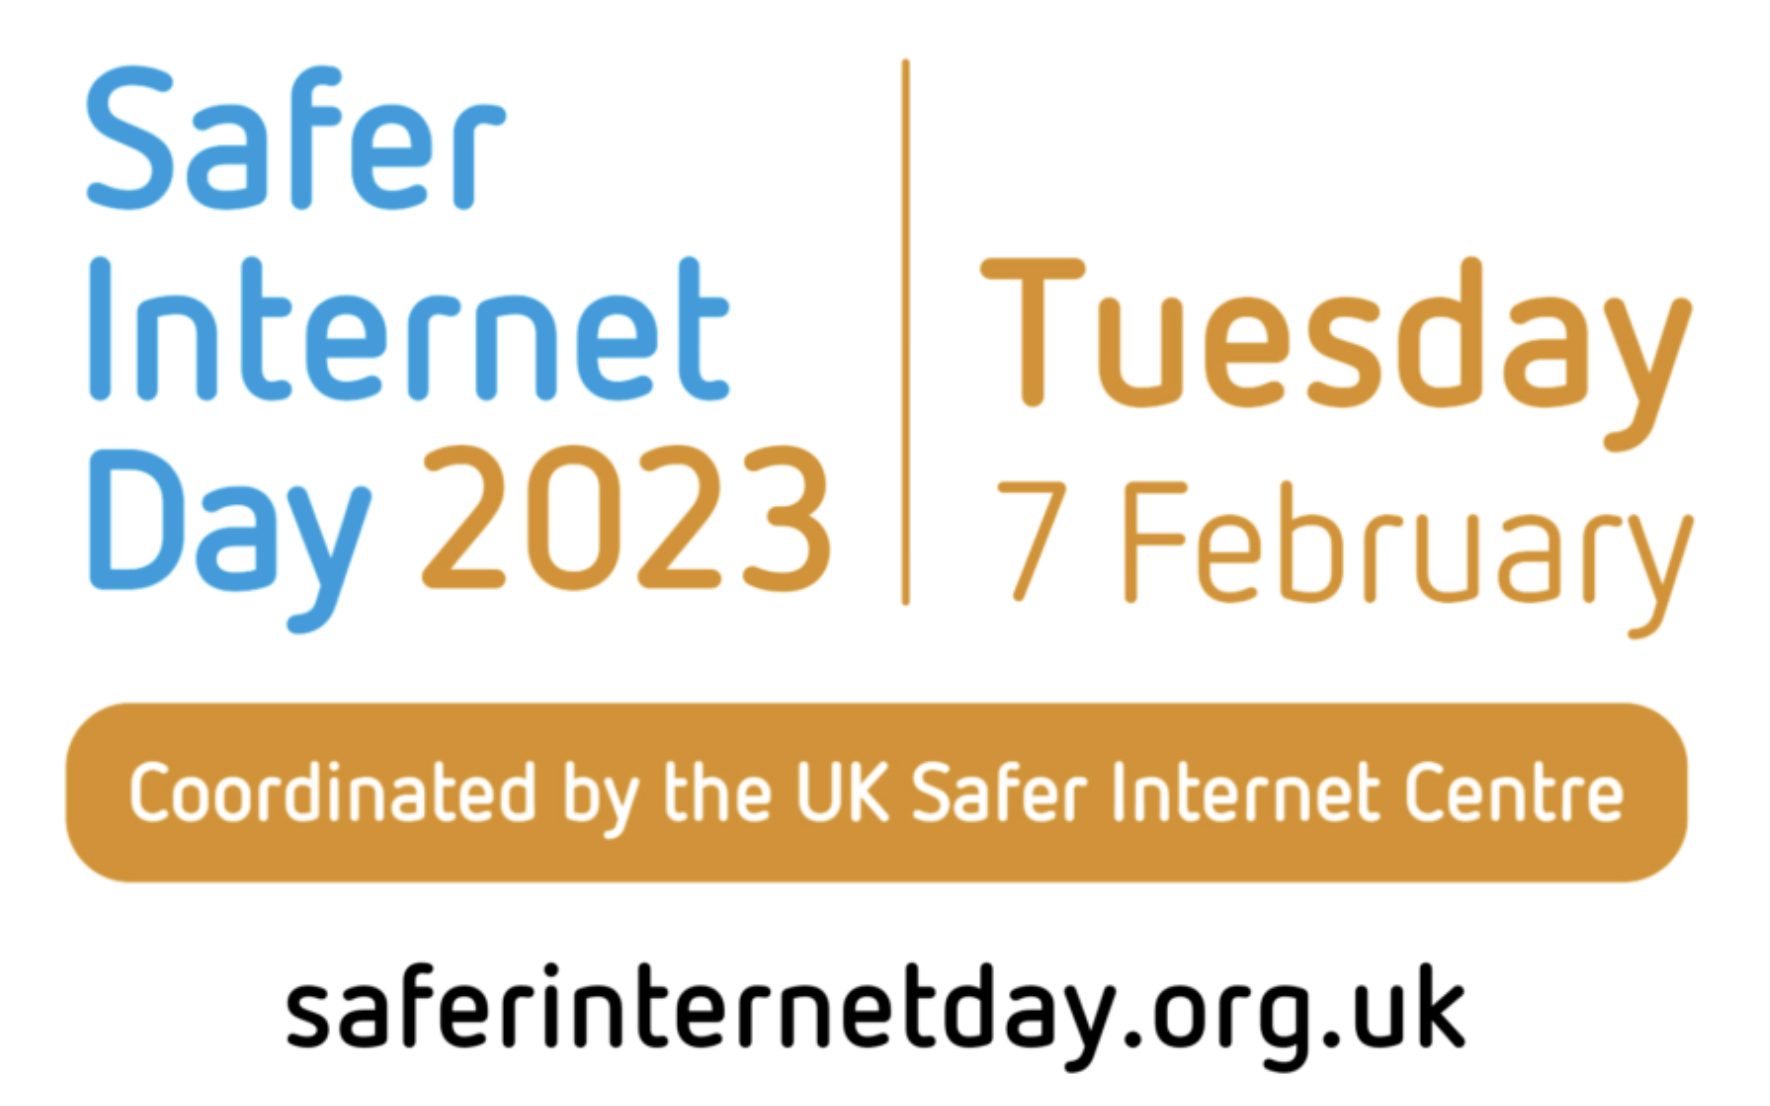 Safer Internet Day 2022 - Tuesday 8th February